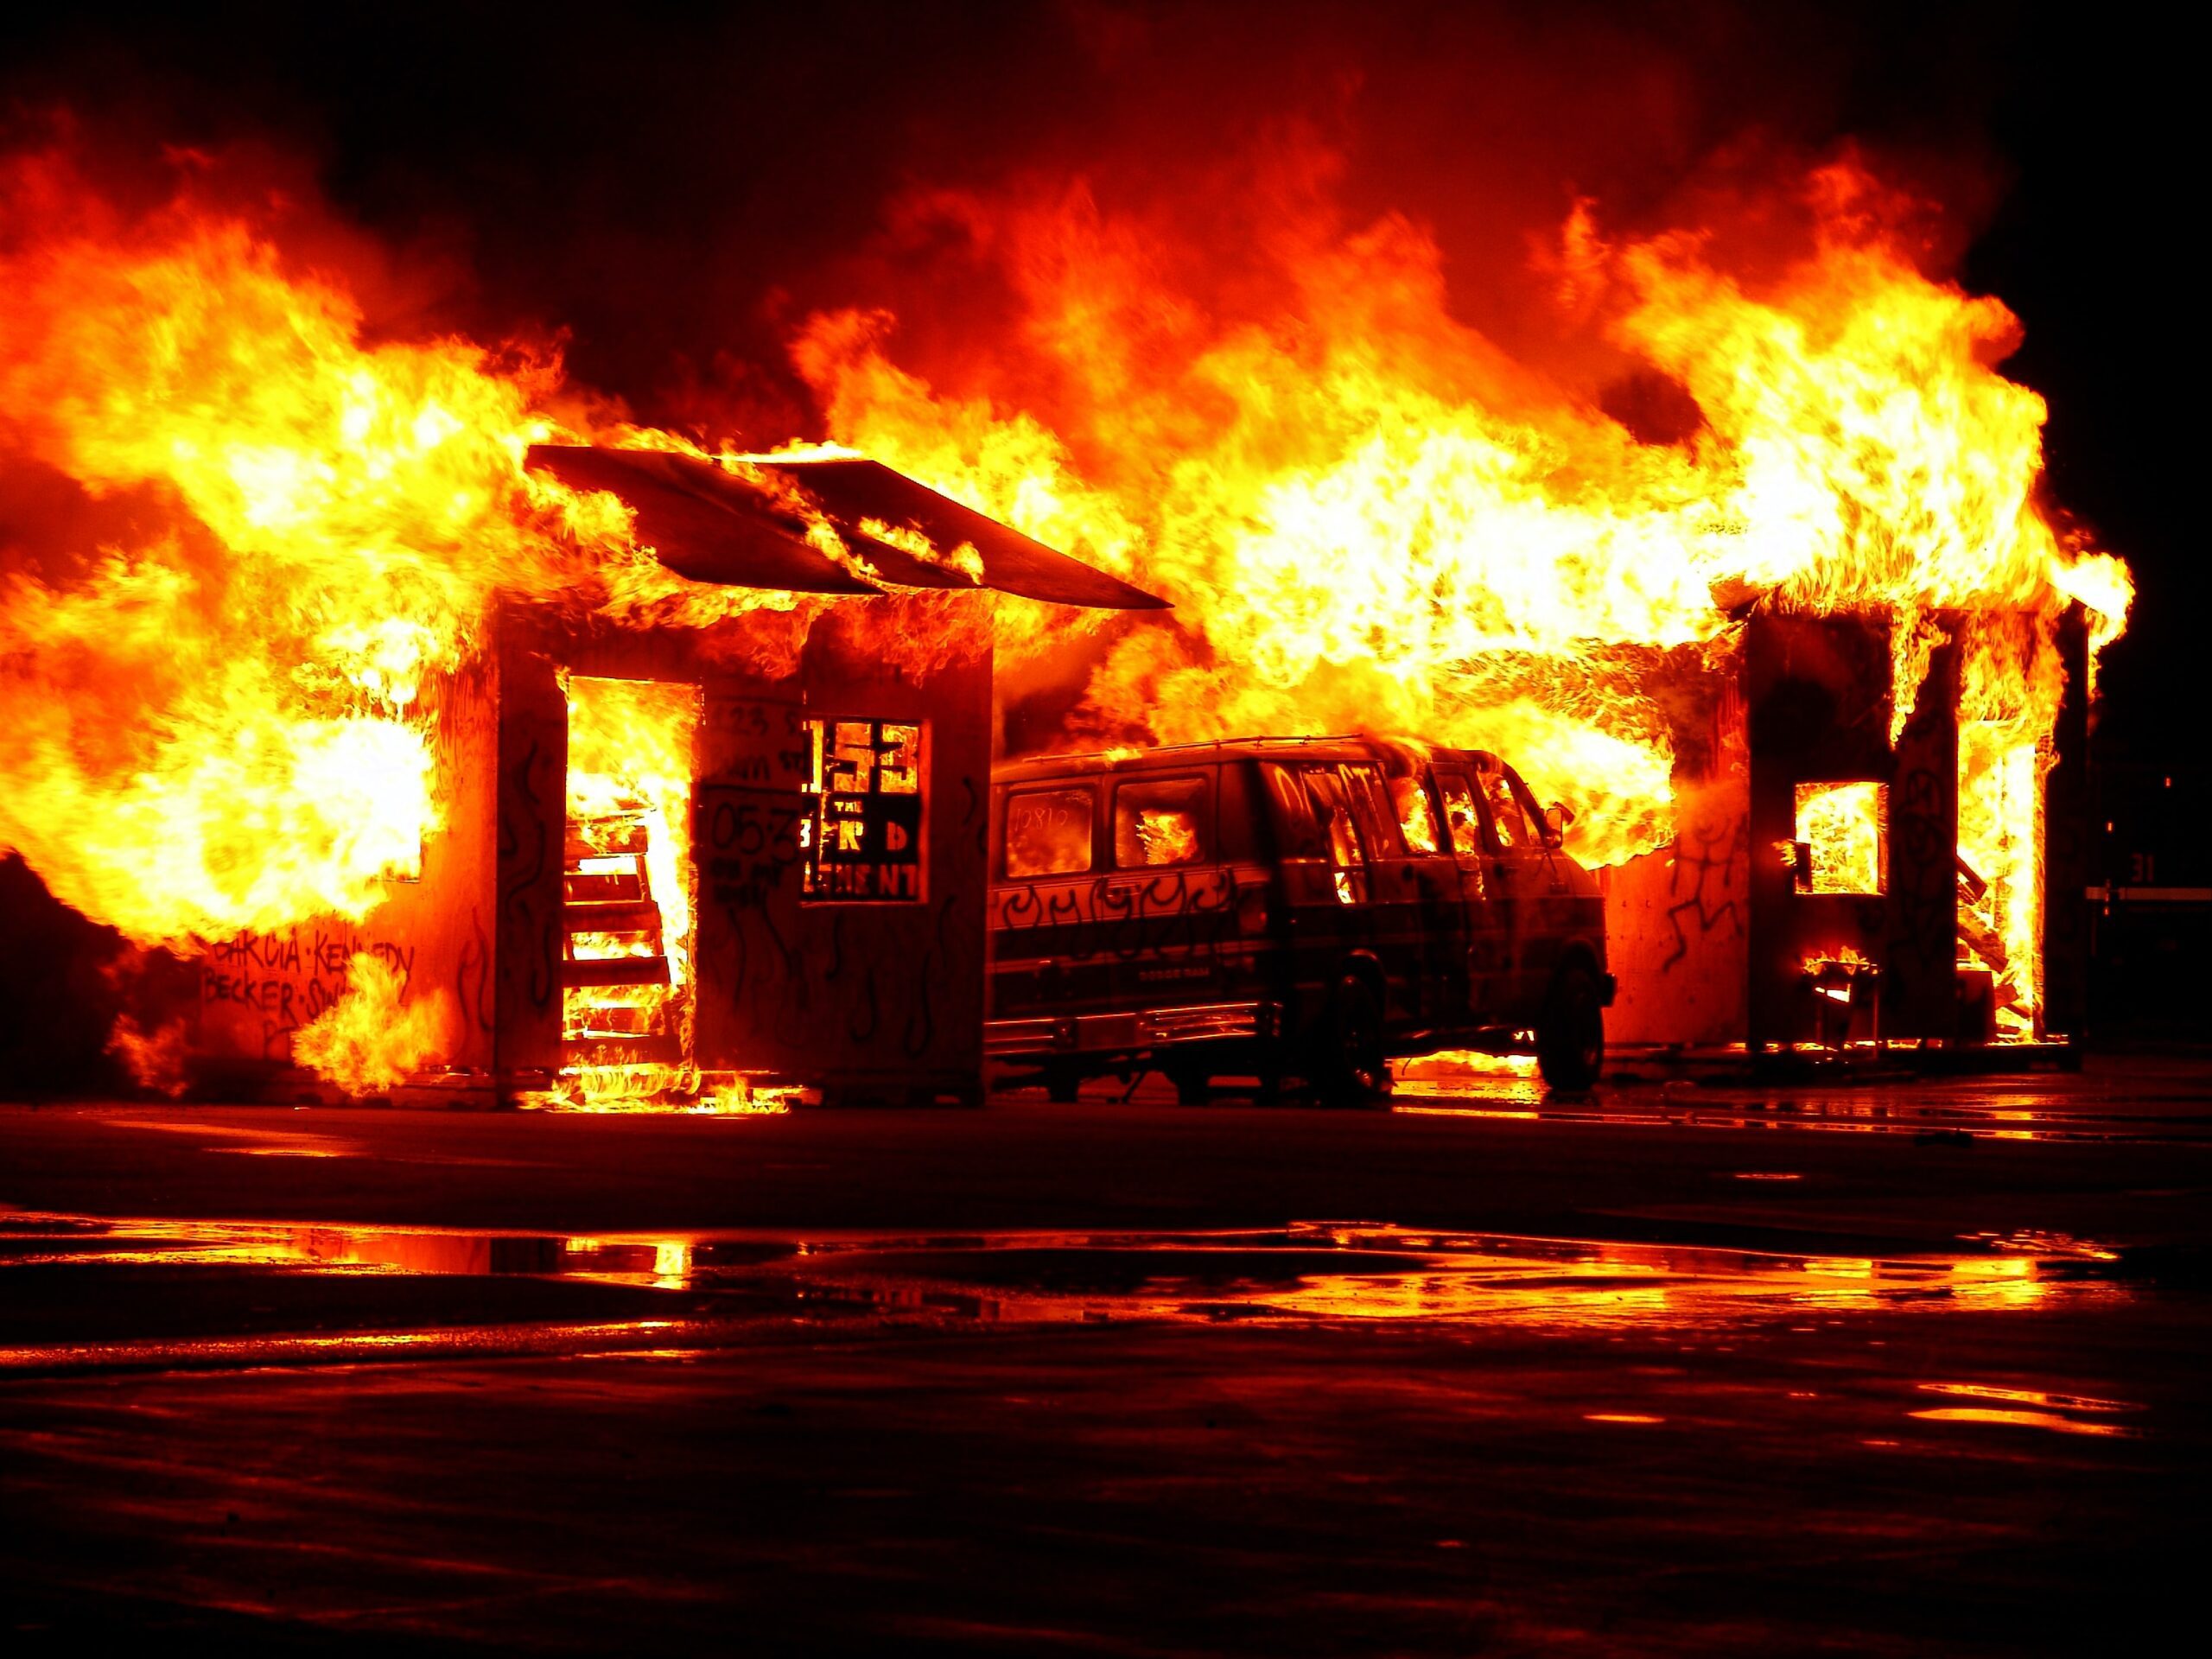 fire damage restoration experts provide advice for fire incident